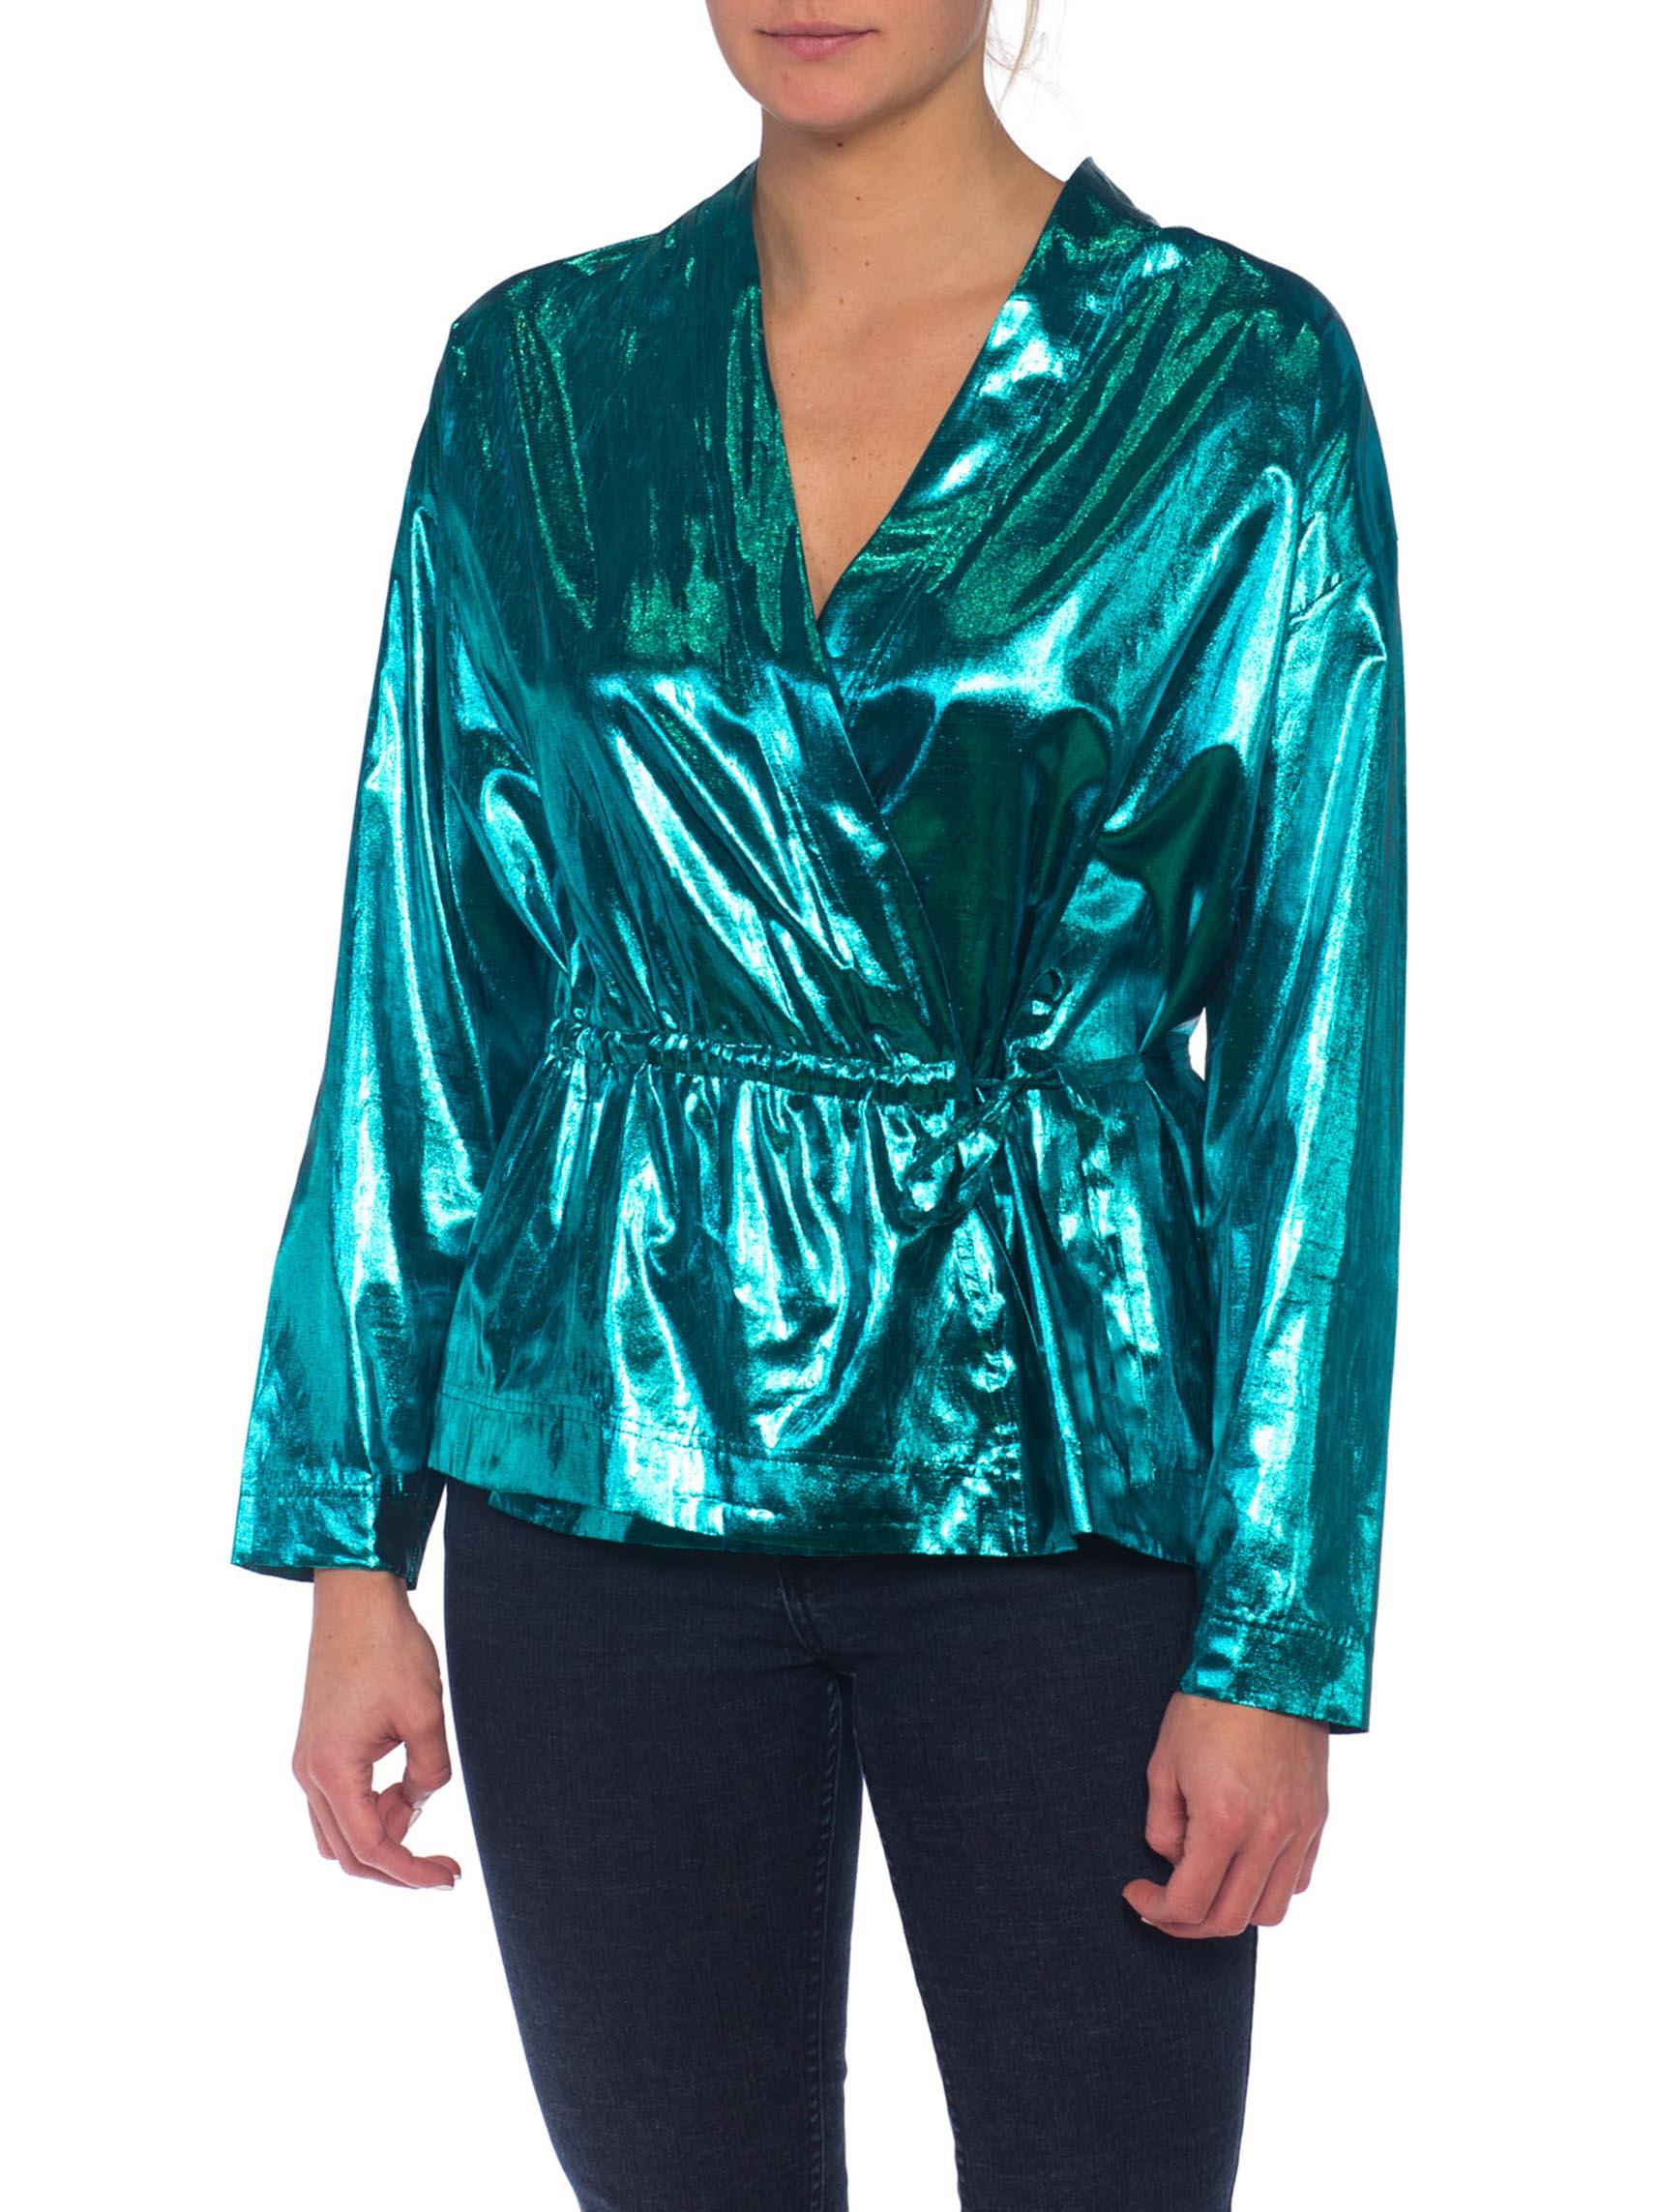 Waist can fit comfortably up to 30 inches 1980S Teal Lamé Gucci Style Disco Wrap Top